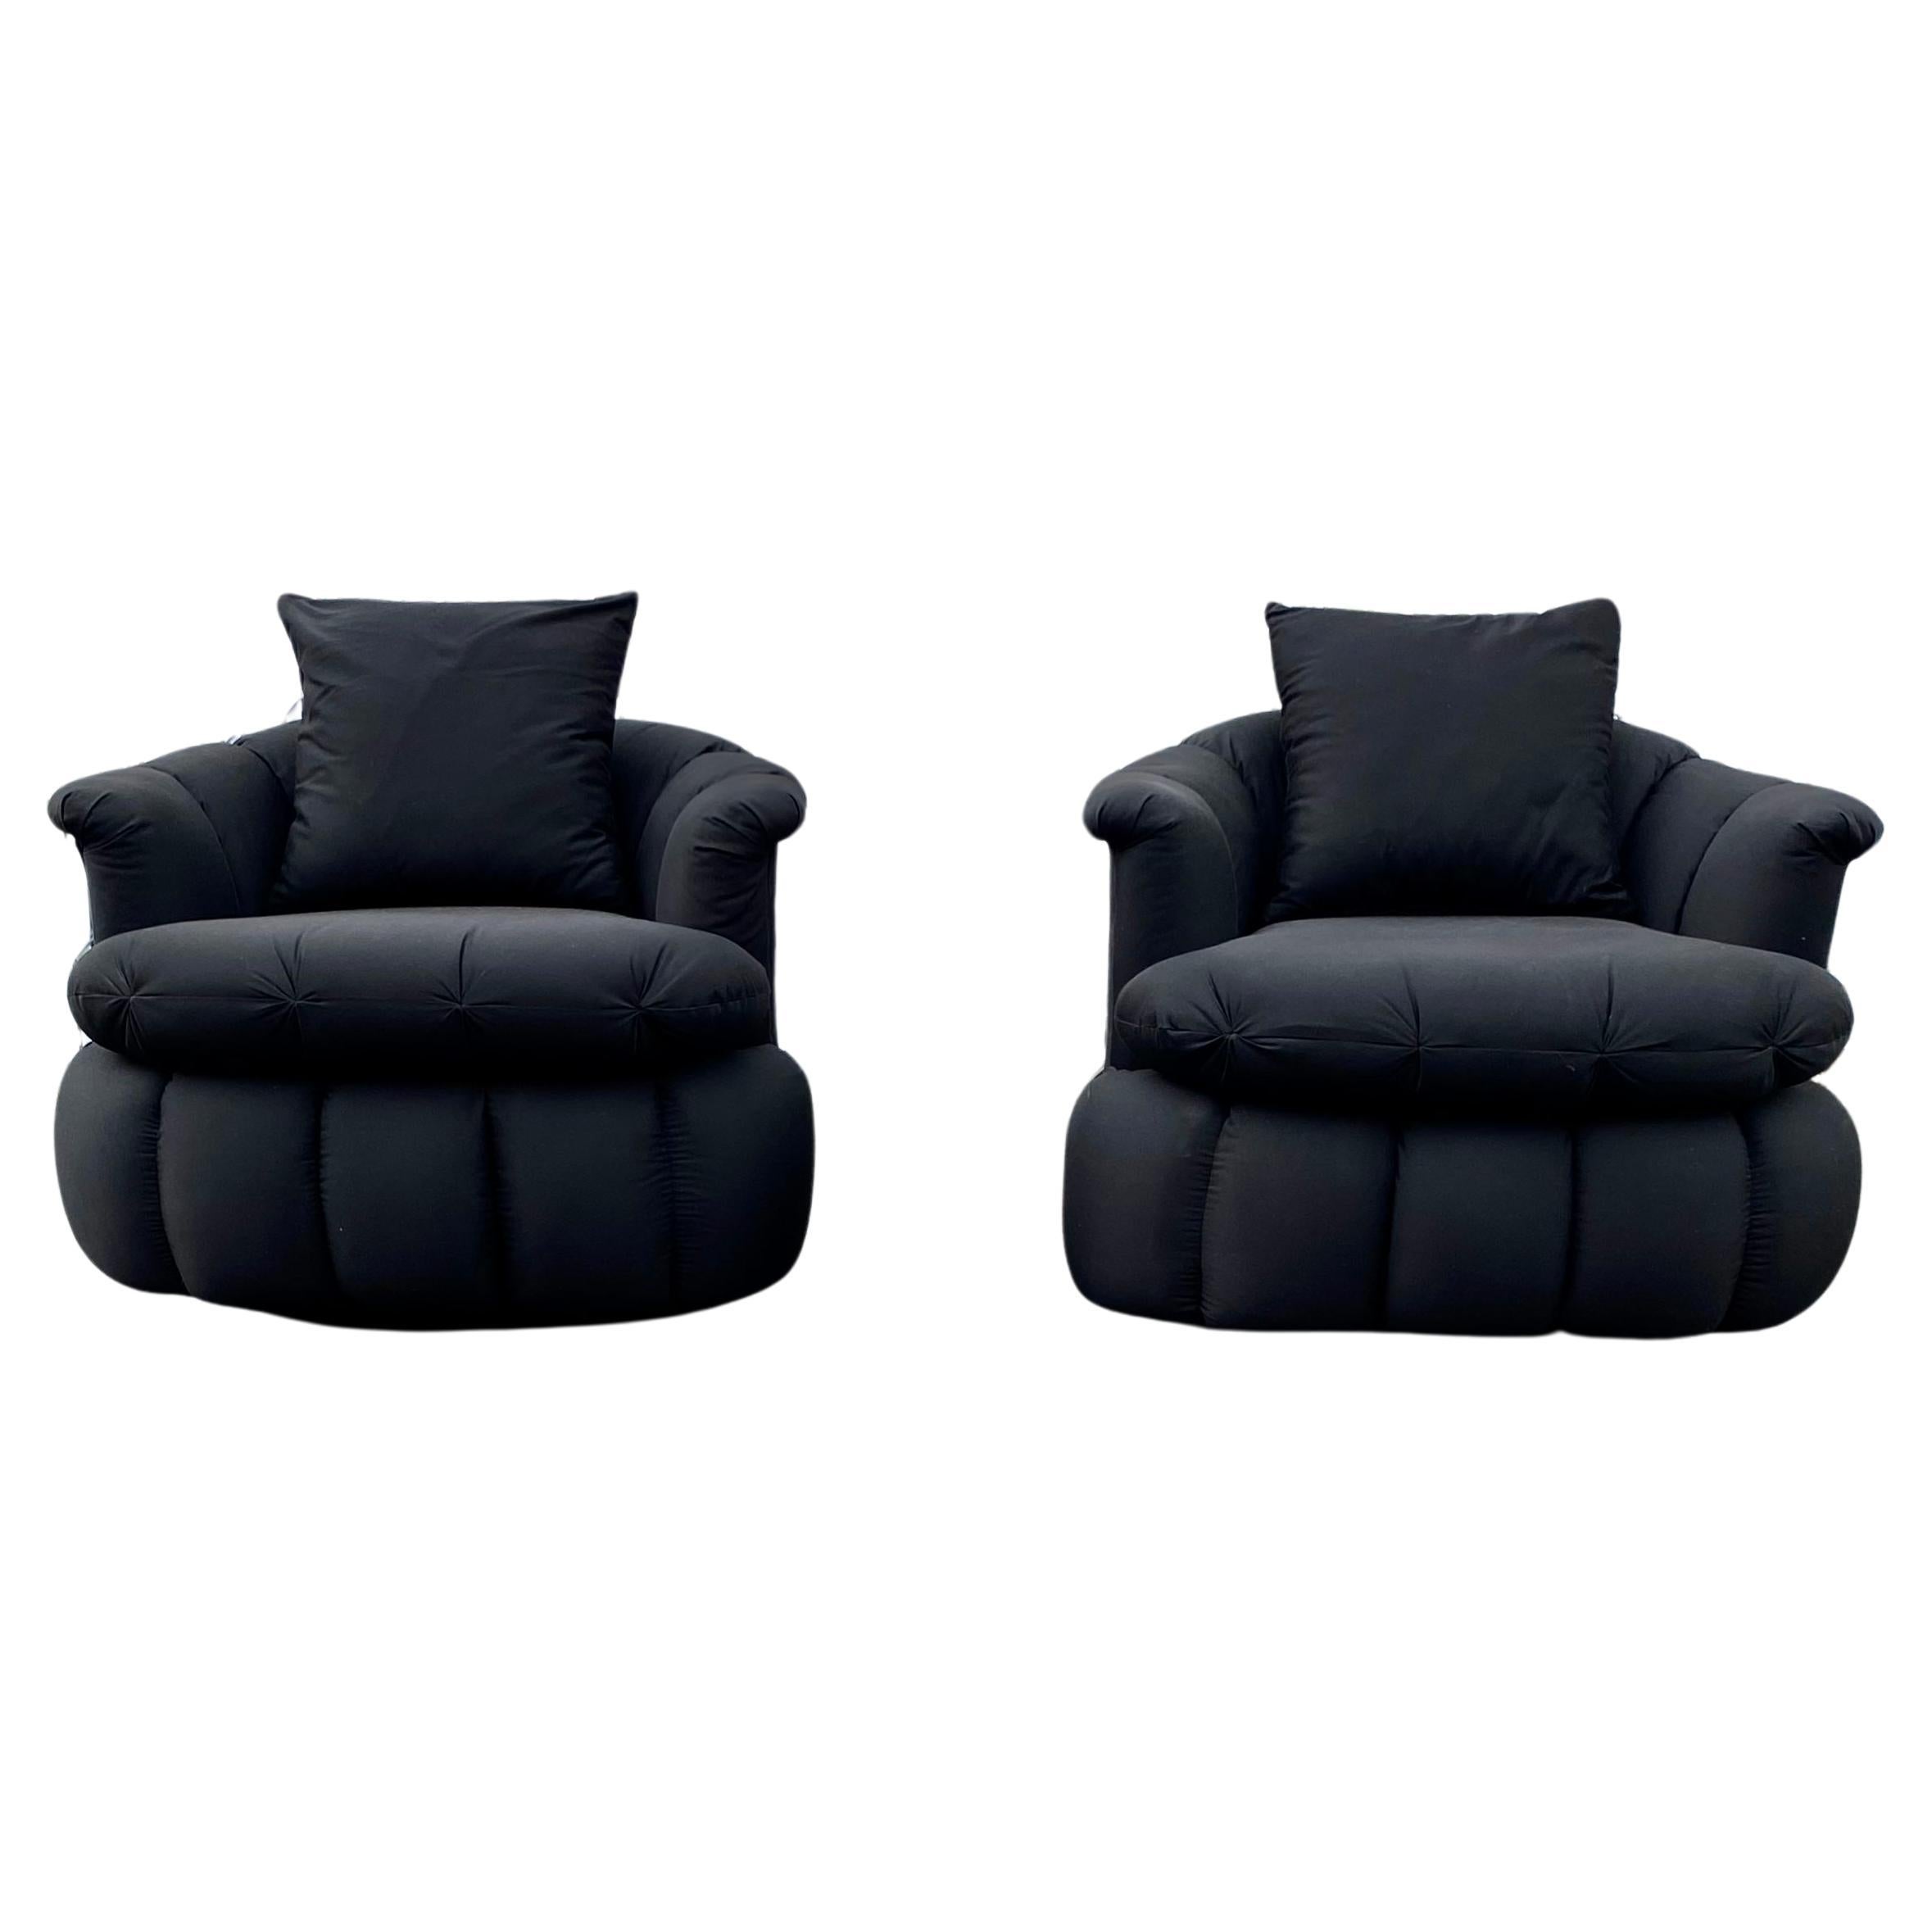 1980s Croissant Tufted Channeled Swivel Chairs, Set of 2 For Sale